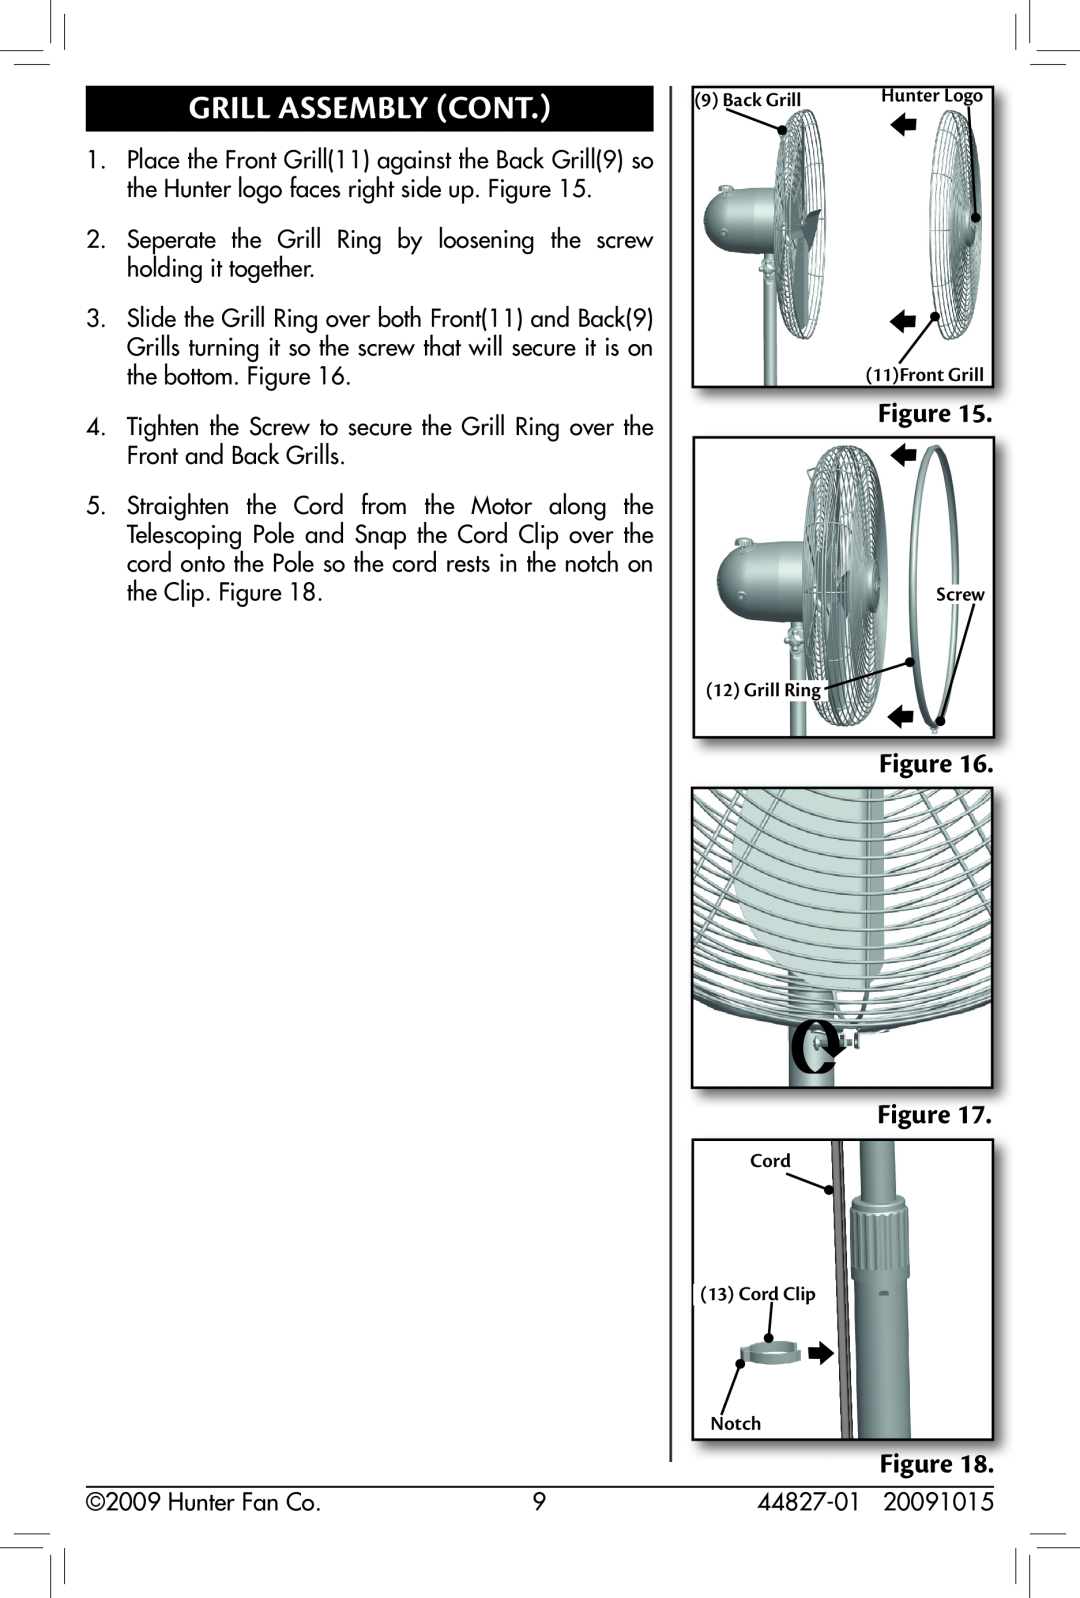 Hunter Fan 44827-01, 90405, 20091015 owner manual Grill Assembly Cont, Figure Figure 